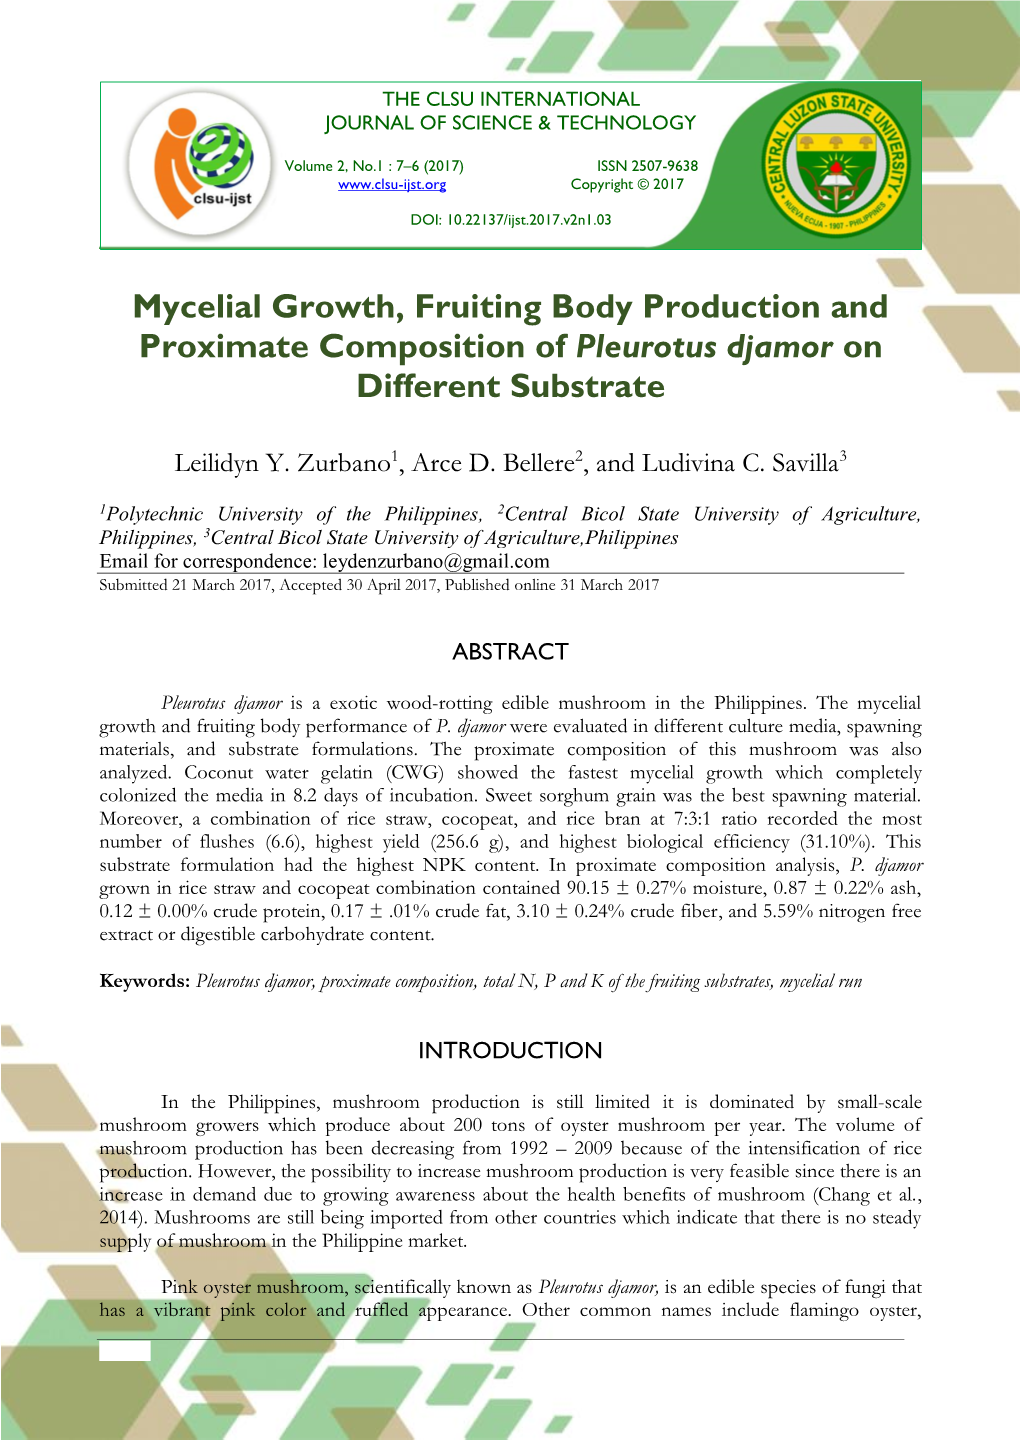 Mycelial Growth, Fruiting Body Production and Proximate Composition of Pleurotus Djamor on Different Substrate